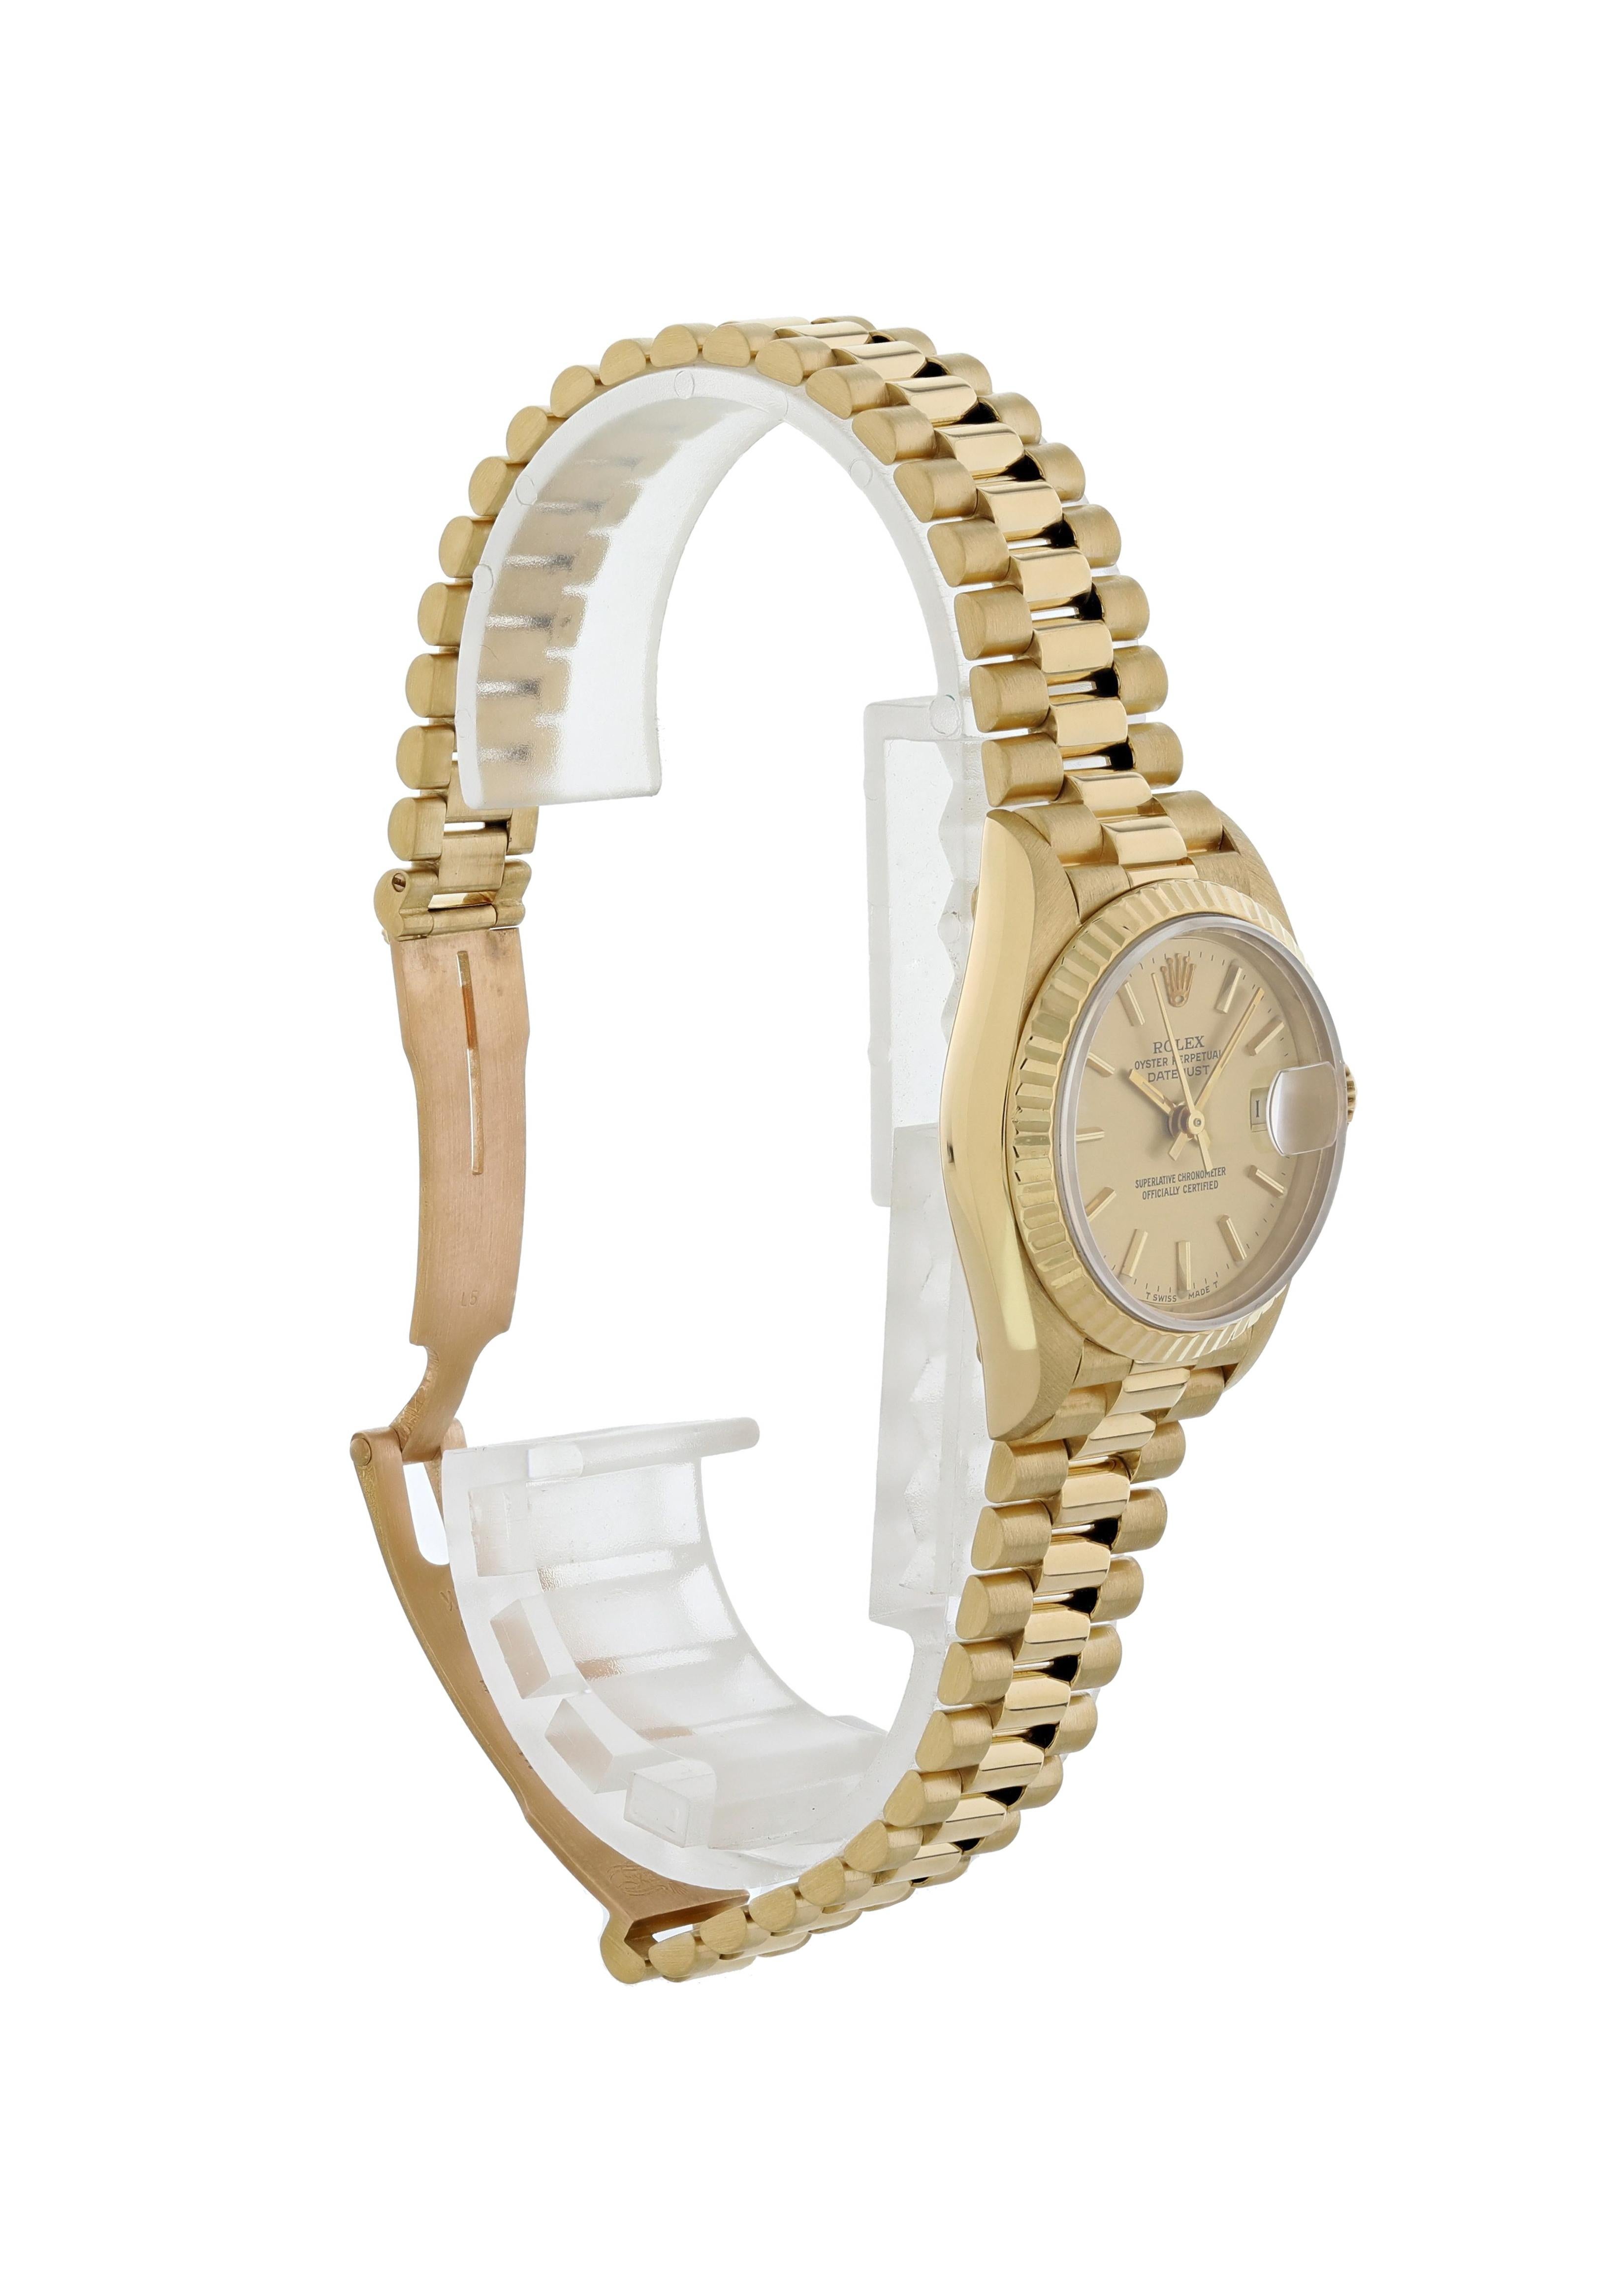 Rolex Datejust 69178 18 Karat Yellow Gold Ladies Watch In Excellent Condition For Sale In New York, NY